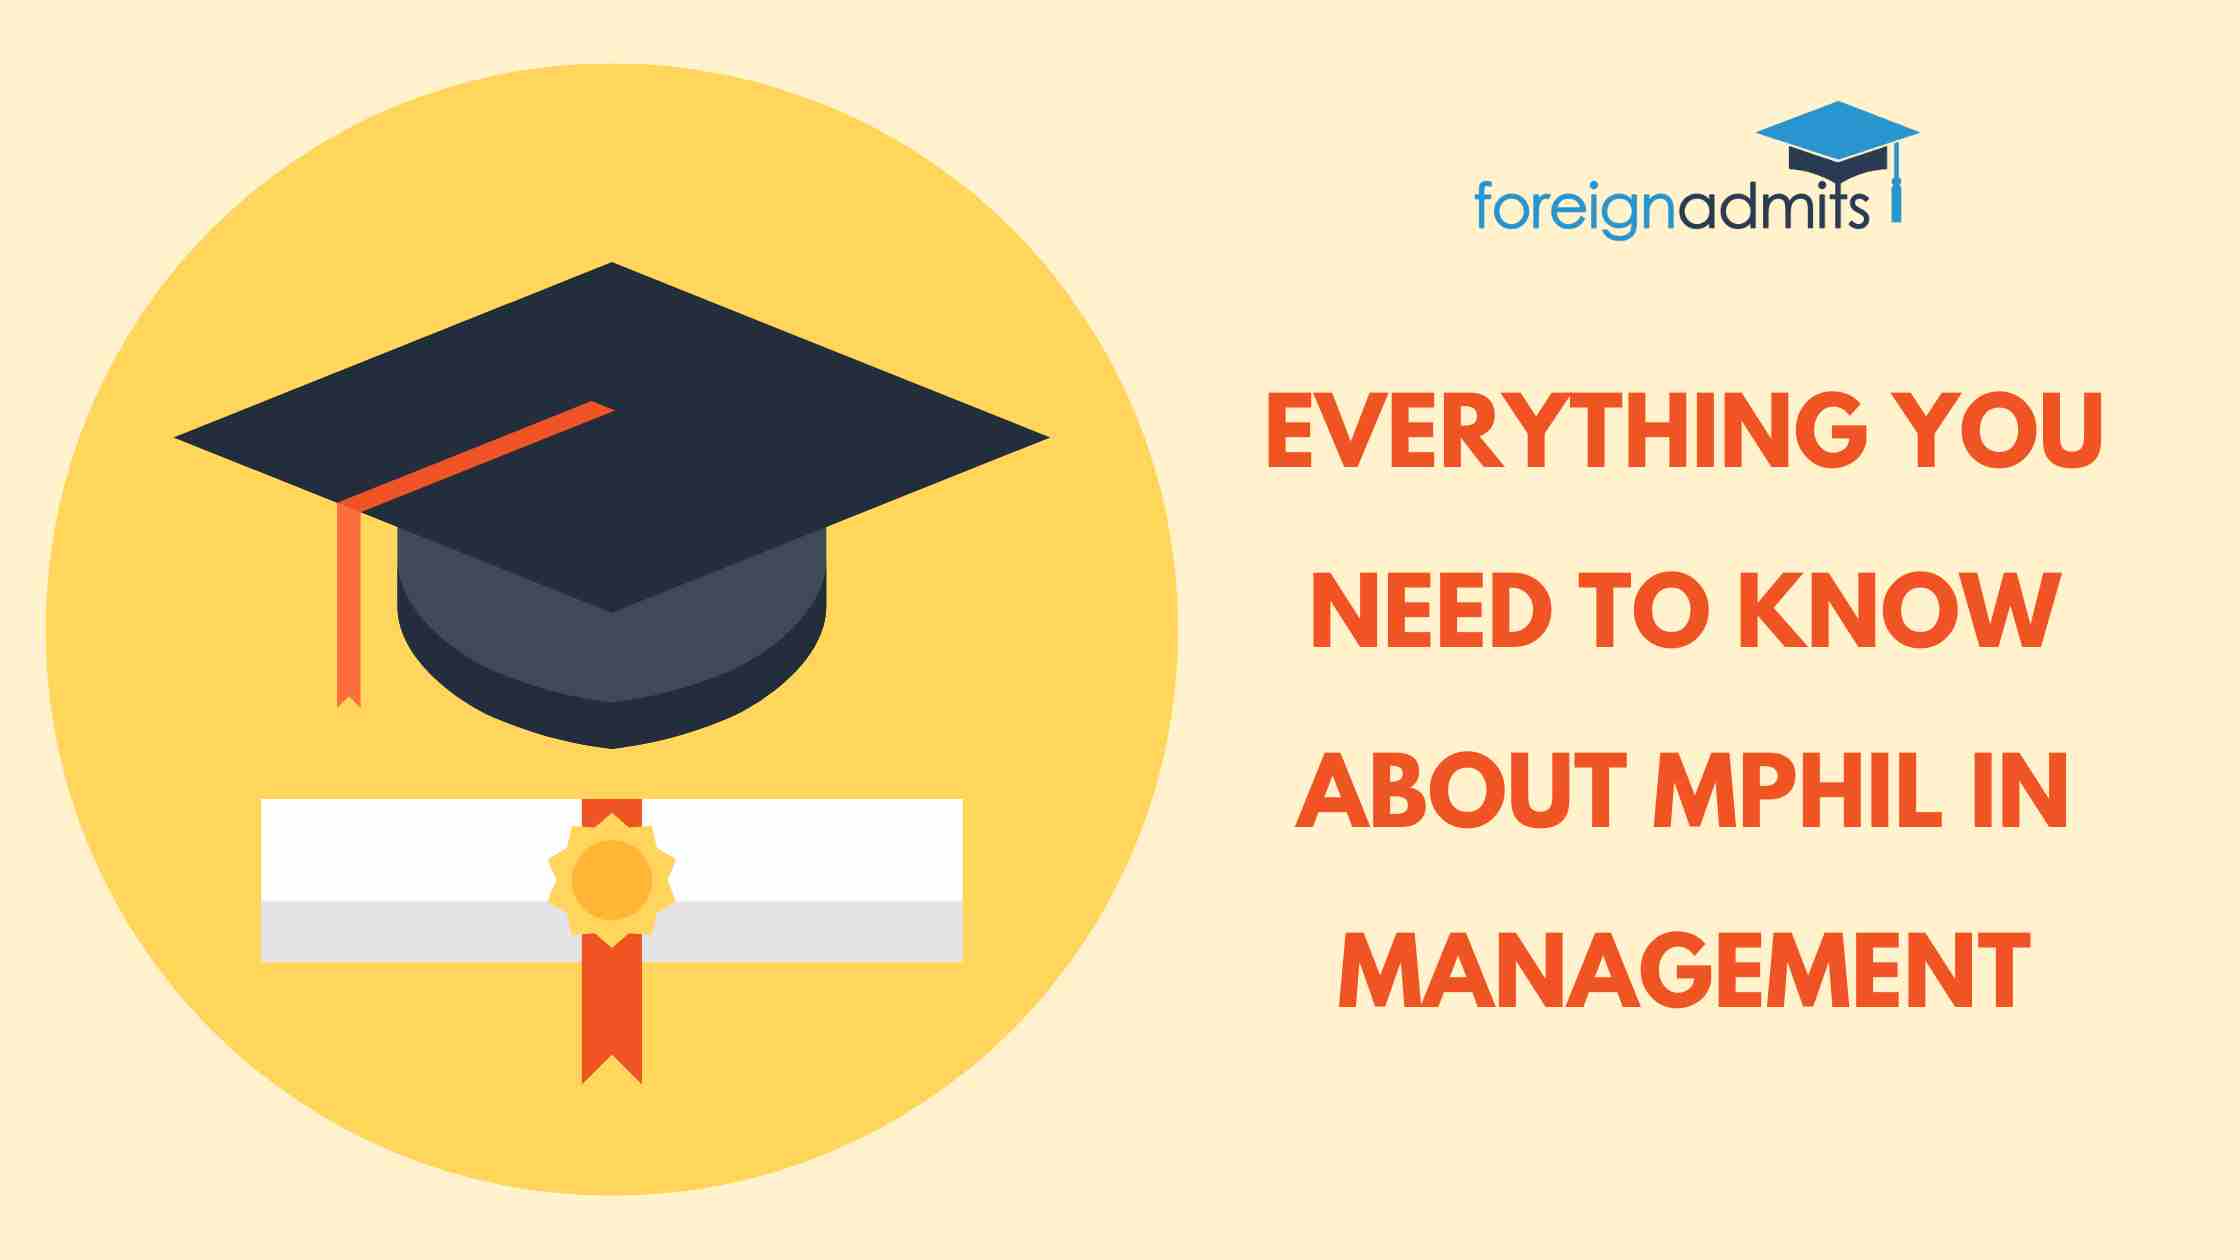 MPhil in Management: Everything You Need to Know